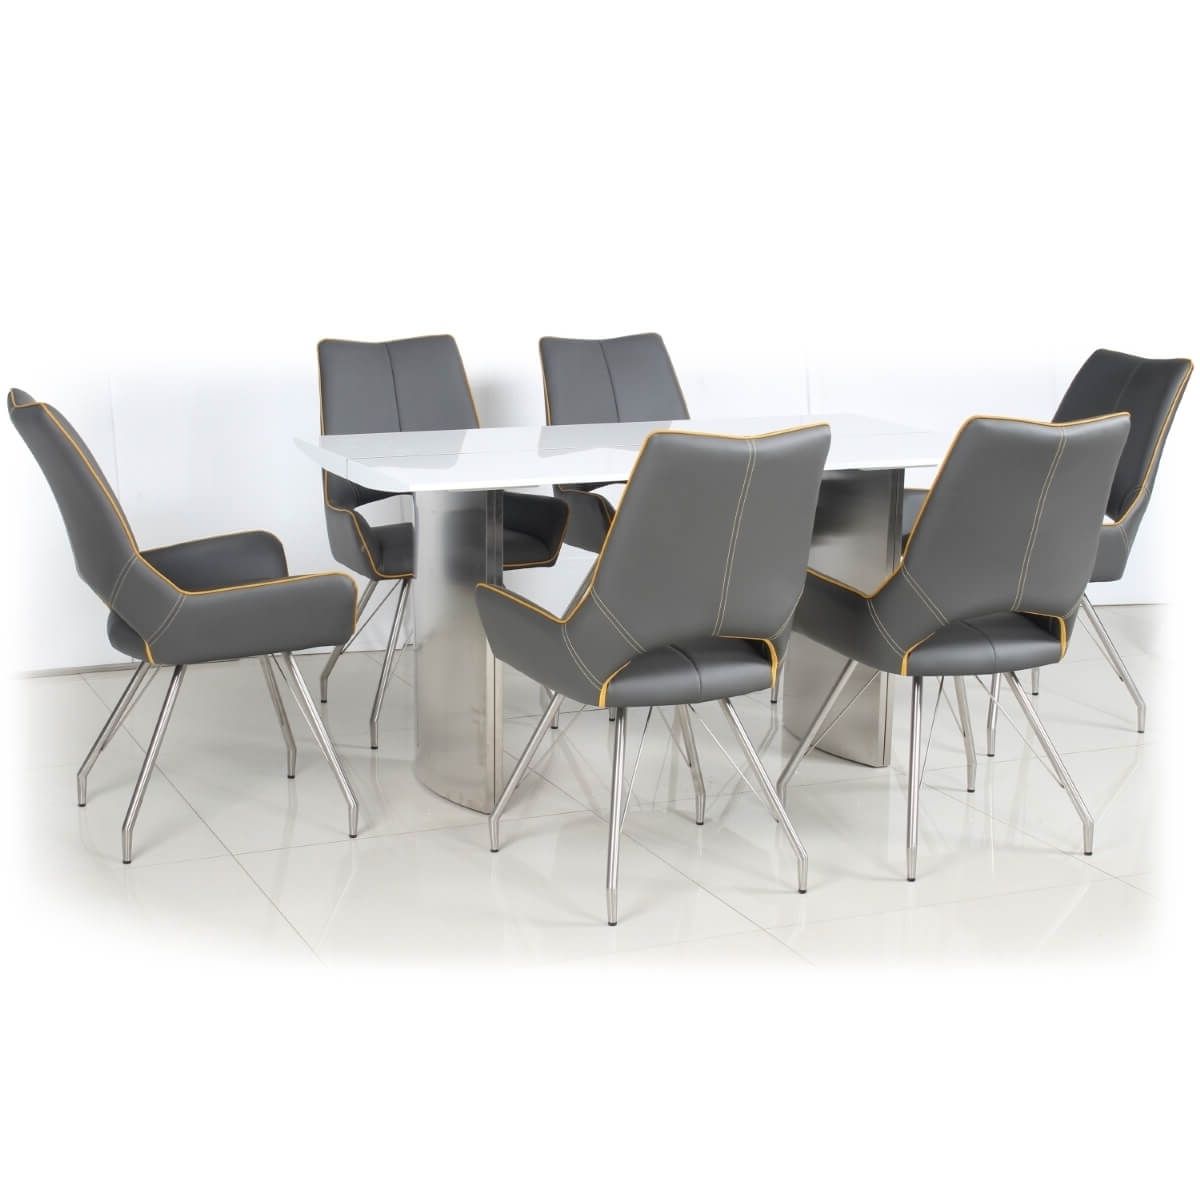 Dining Set – White High Gloss Dining Table And 6 Grey Dining Chairs Throughout Best And Newest Black Gloss Dining Tables And 6 Chairs (View 22 of 25)